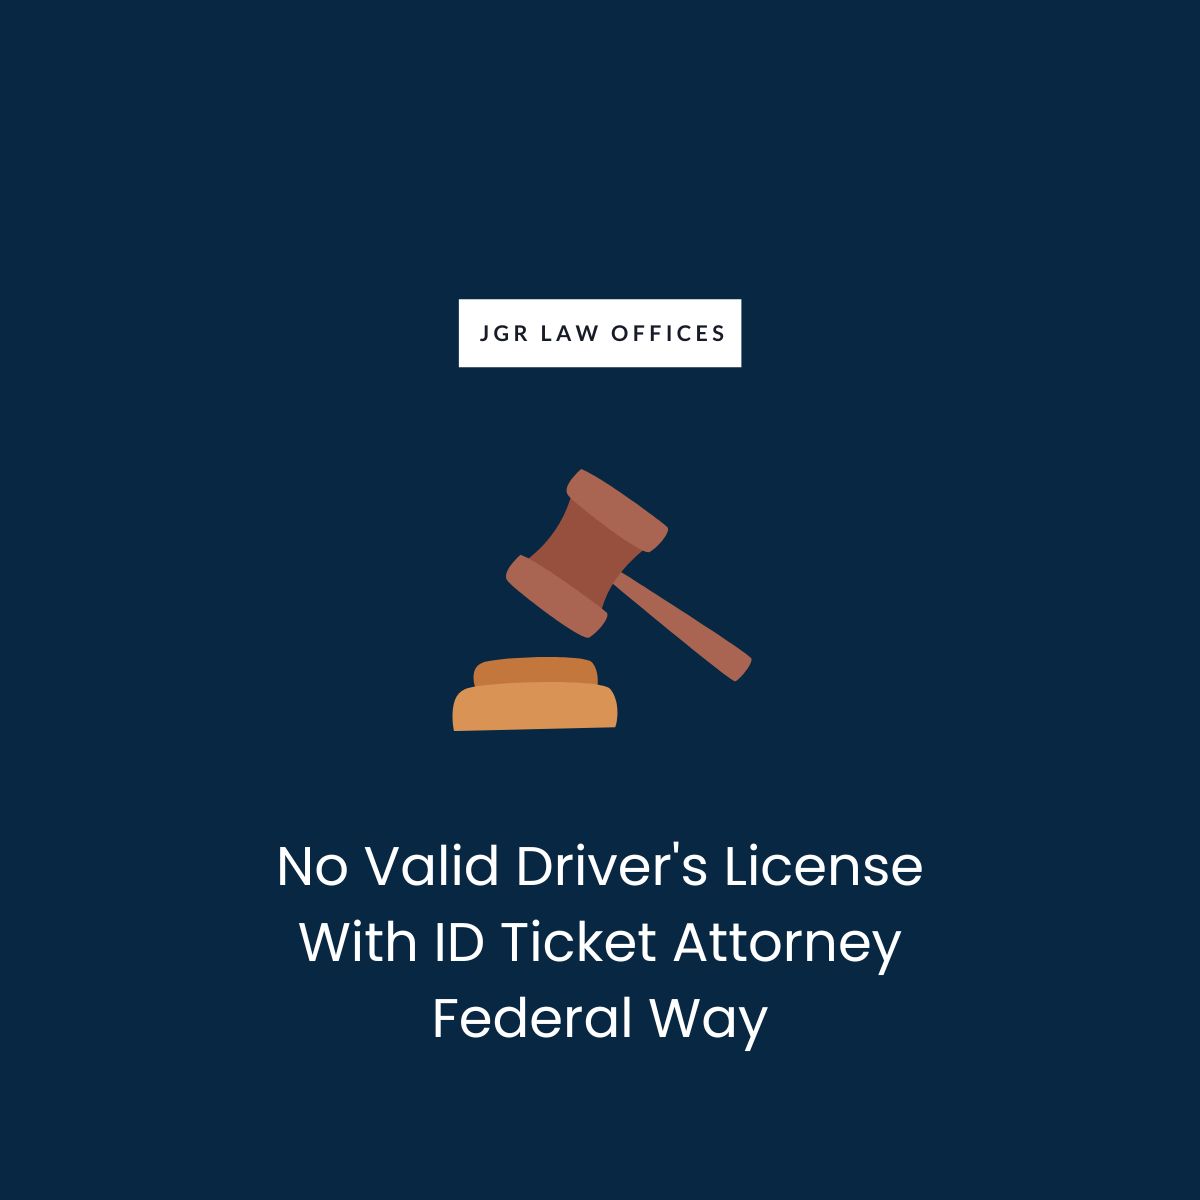 No Valid Driver's License With ID Ticket Attorney Federal Way